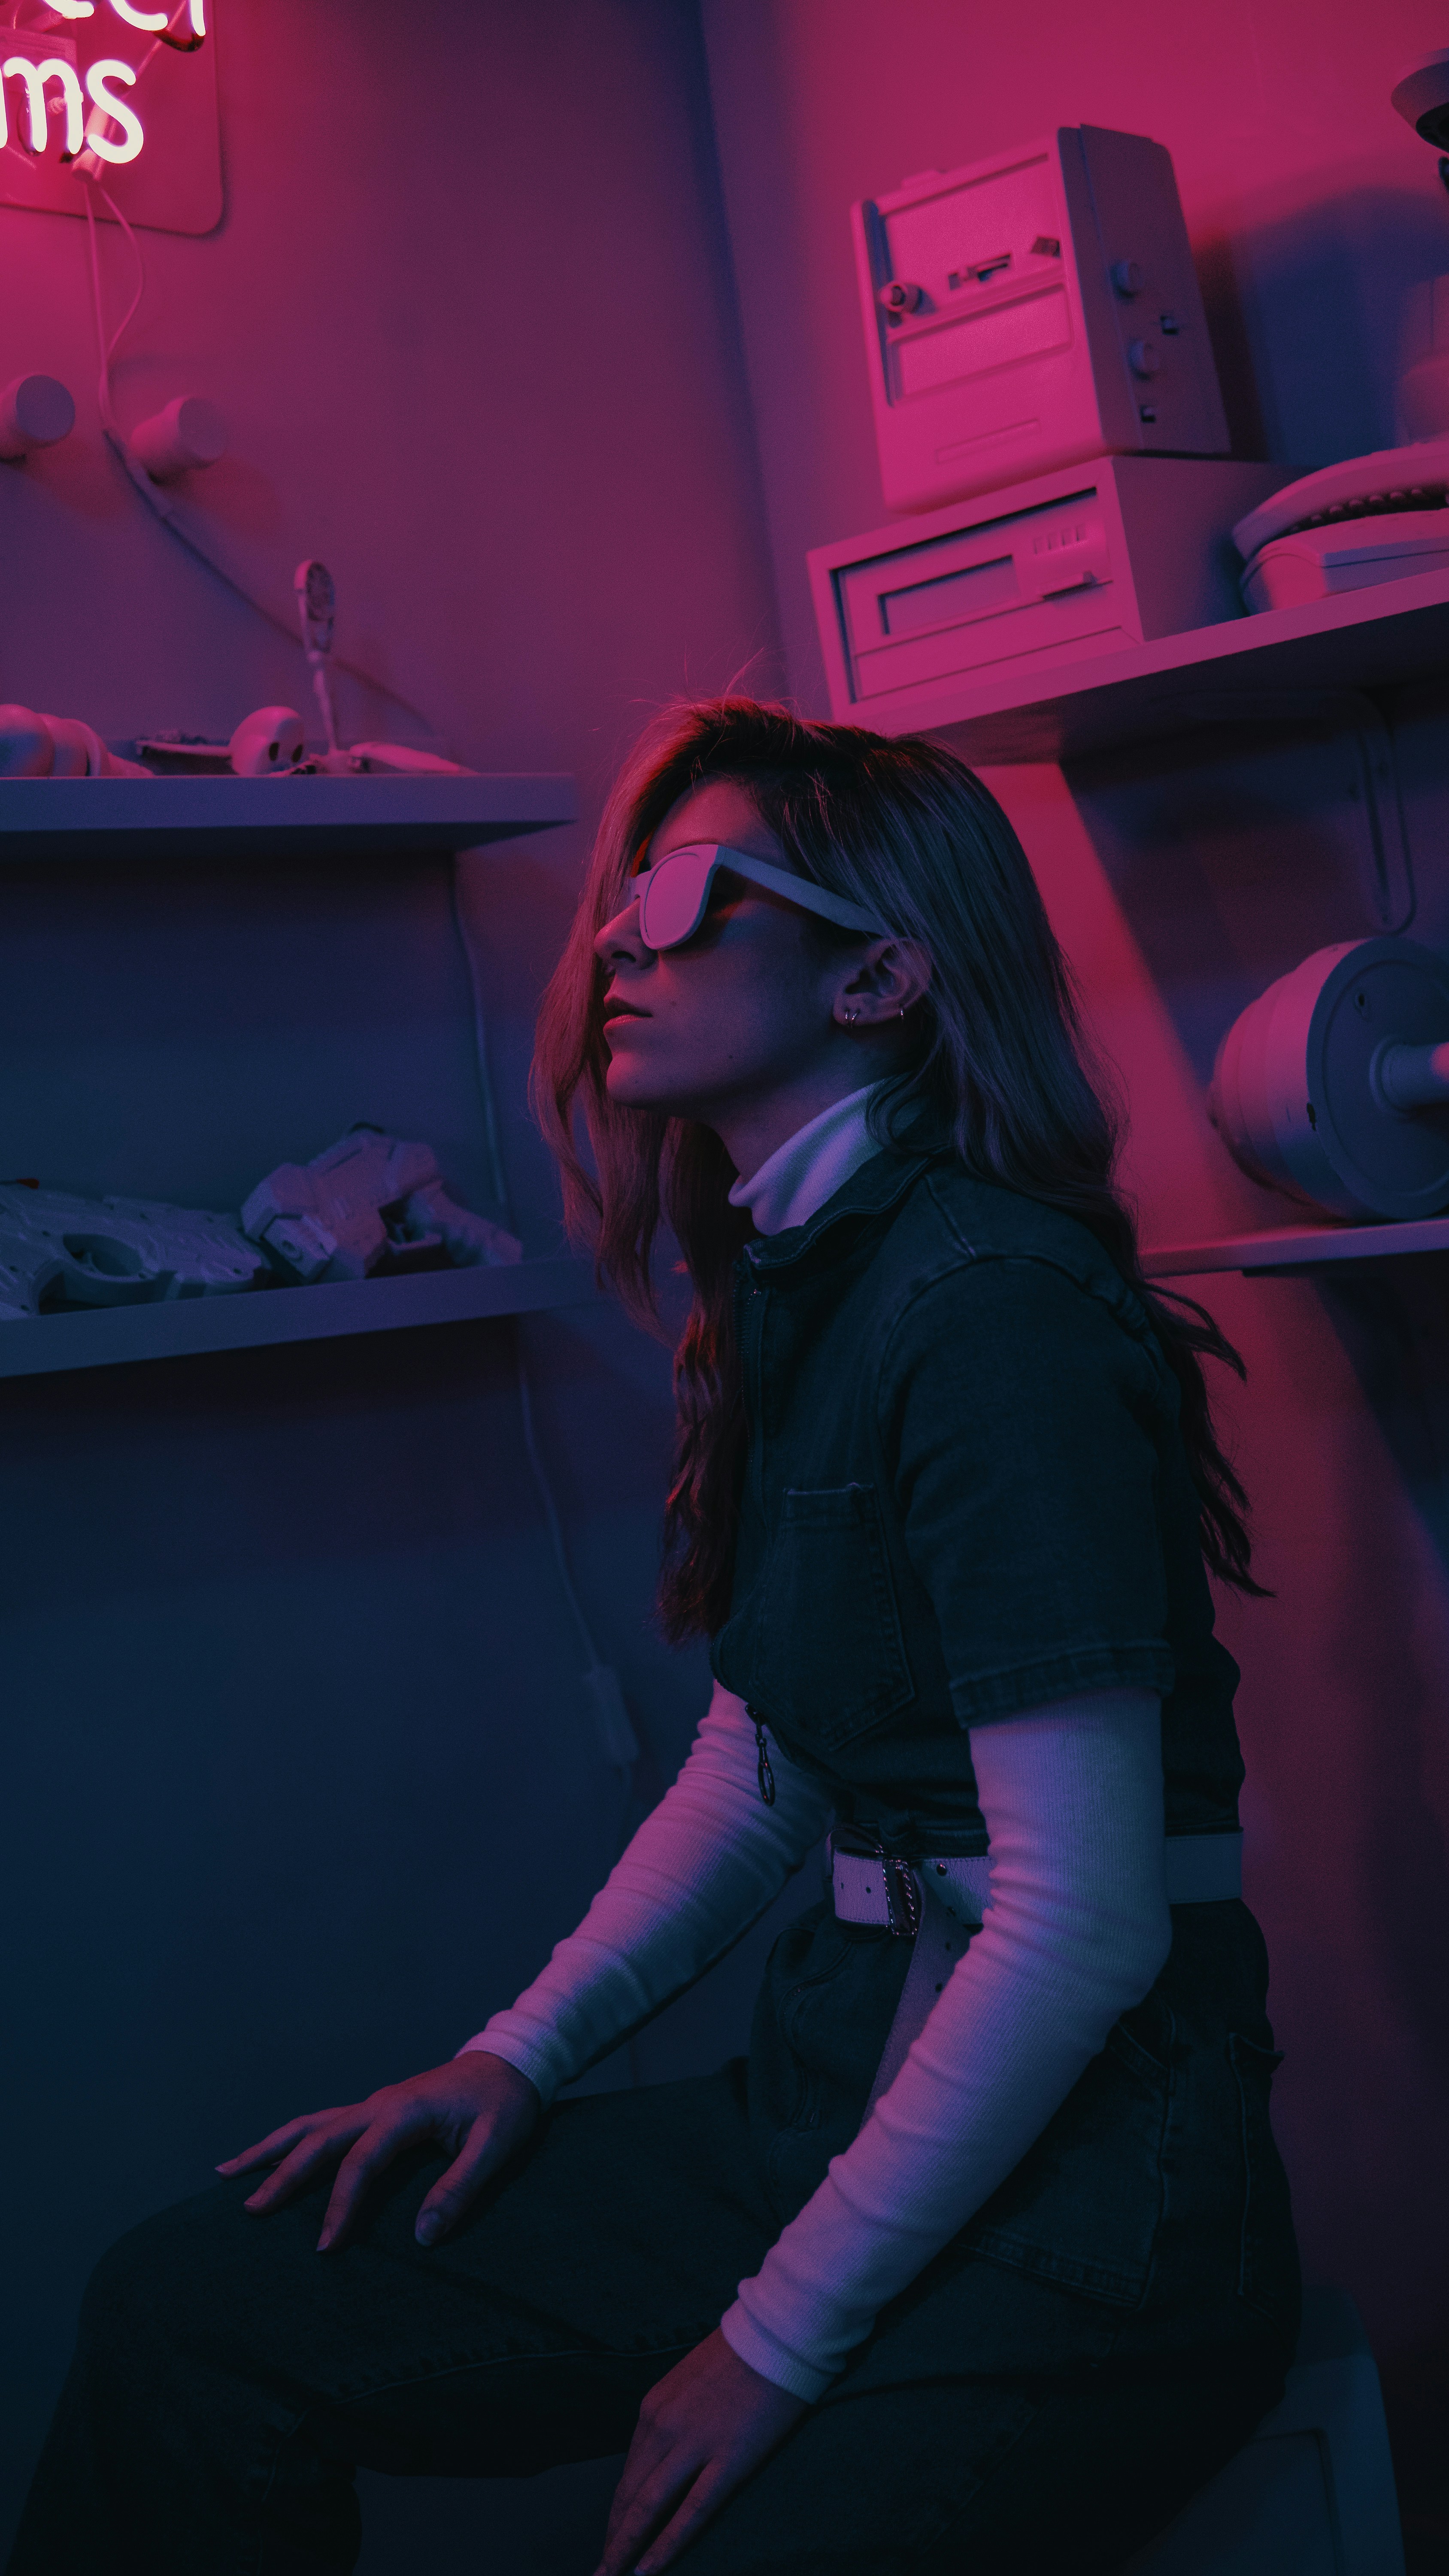 a woman wearing sunglasses and sitting in a room